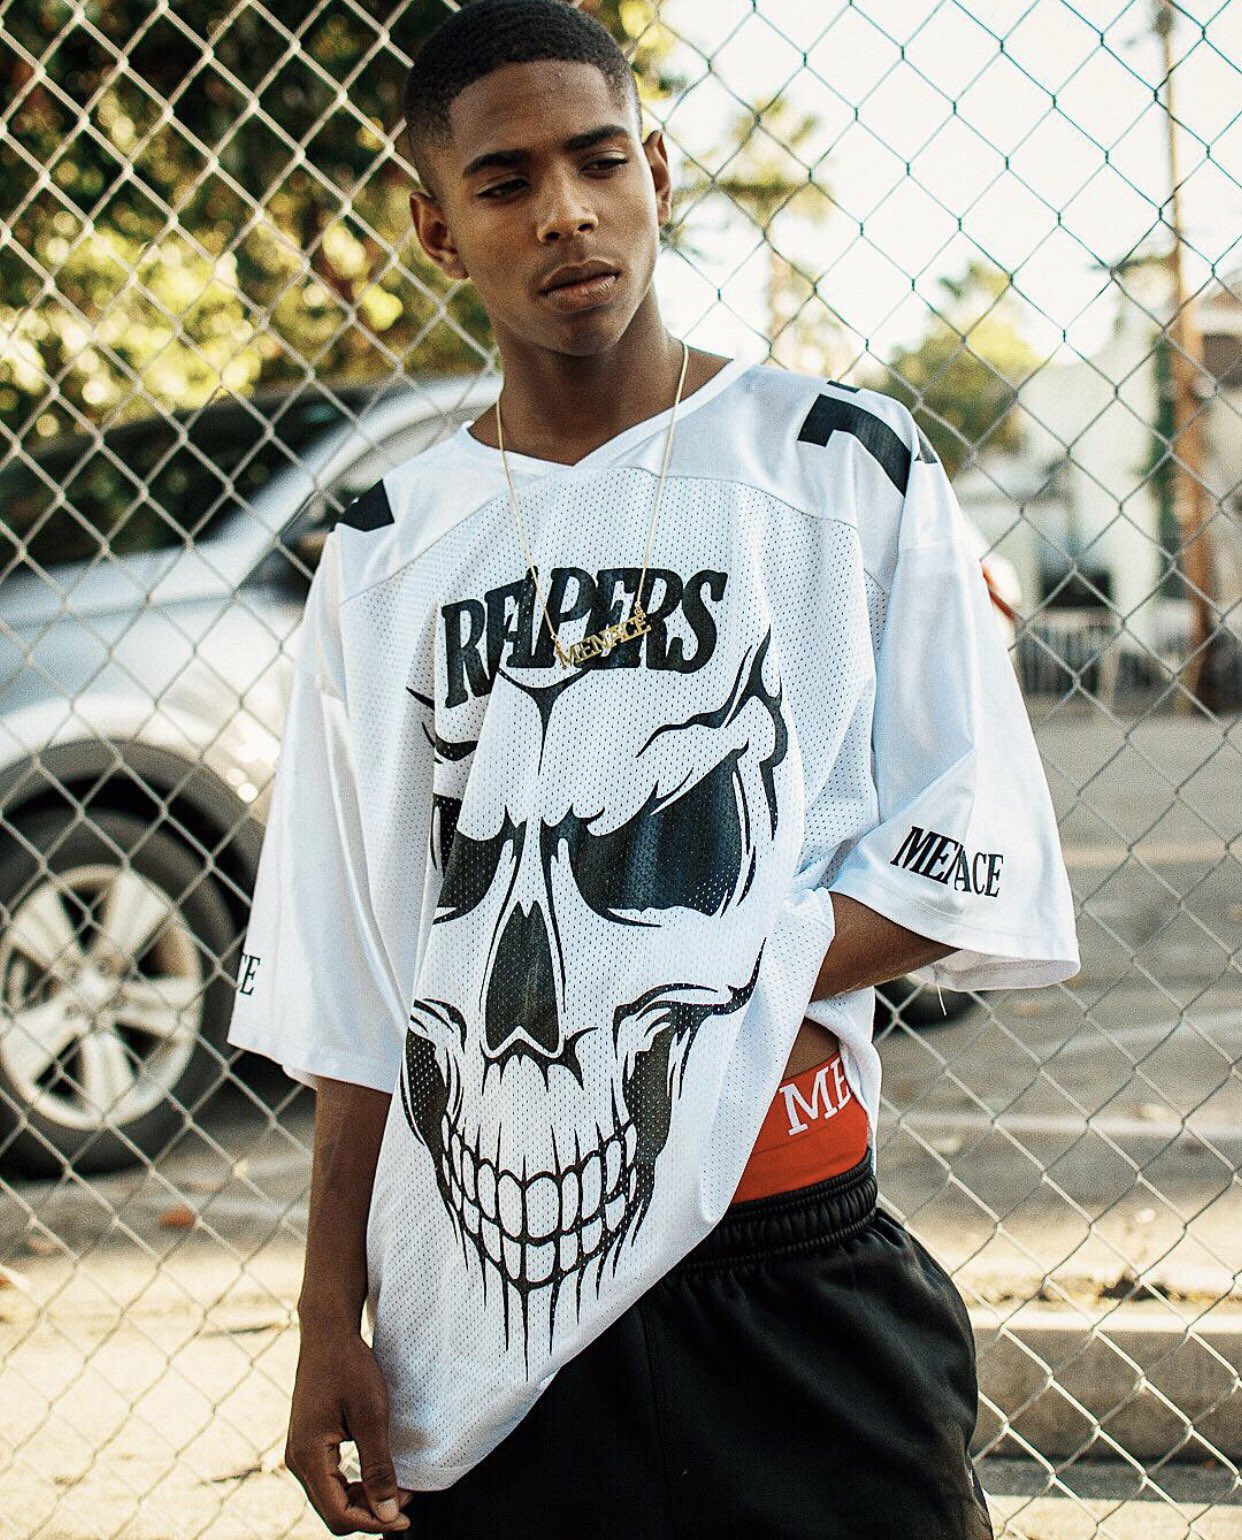 OVERSIZED REAPERS MESH FOOTBALL JERSEY by MENACE